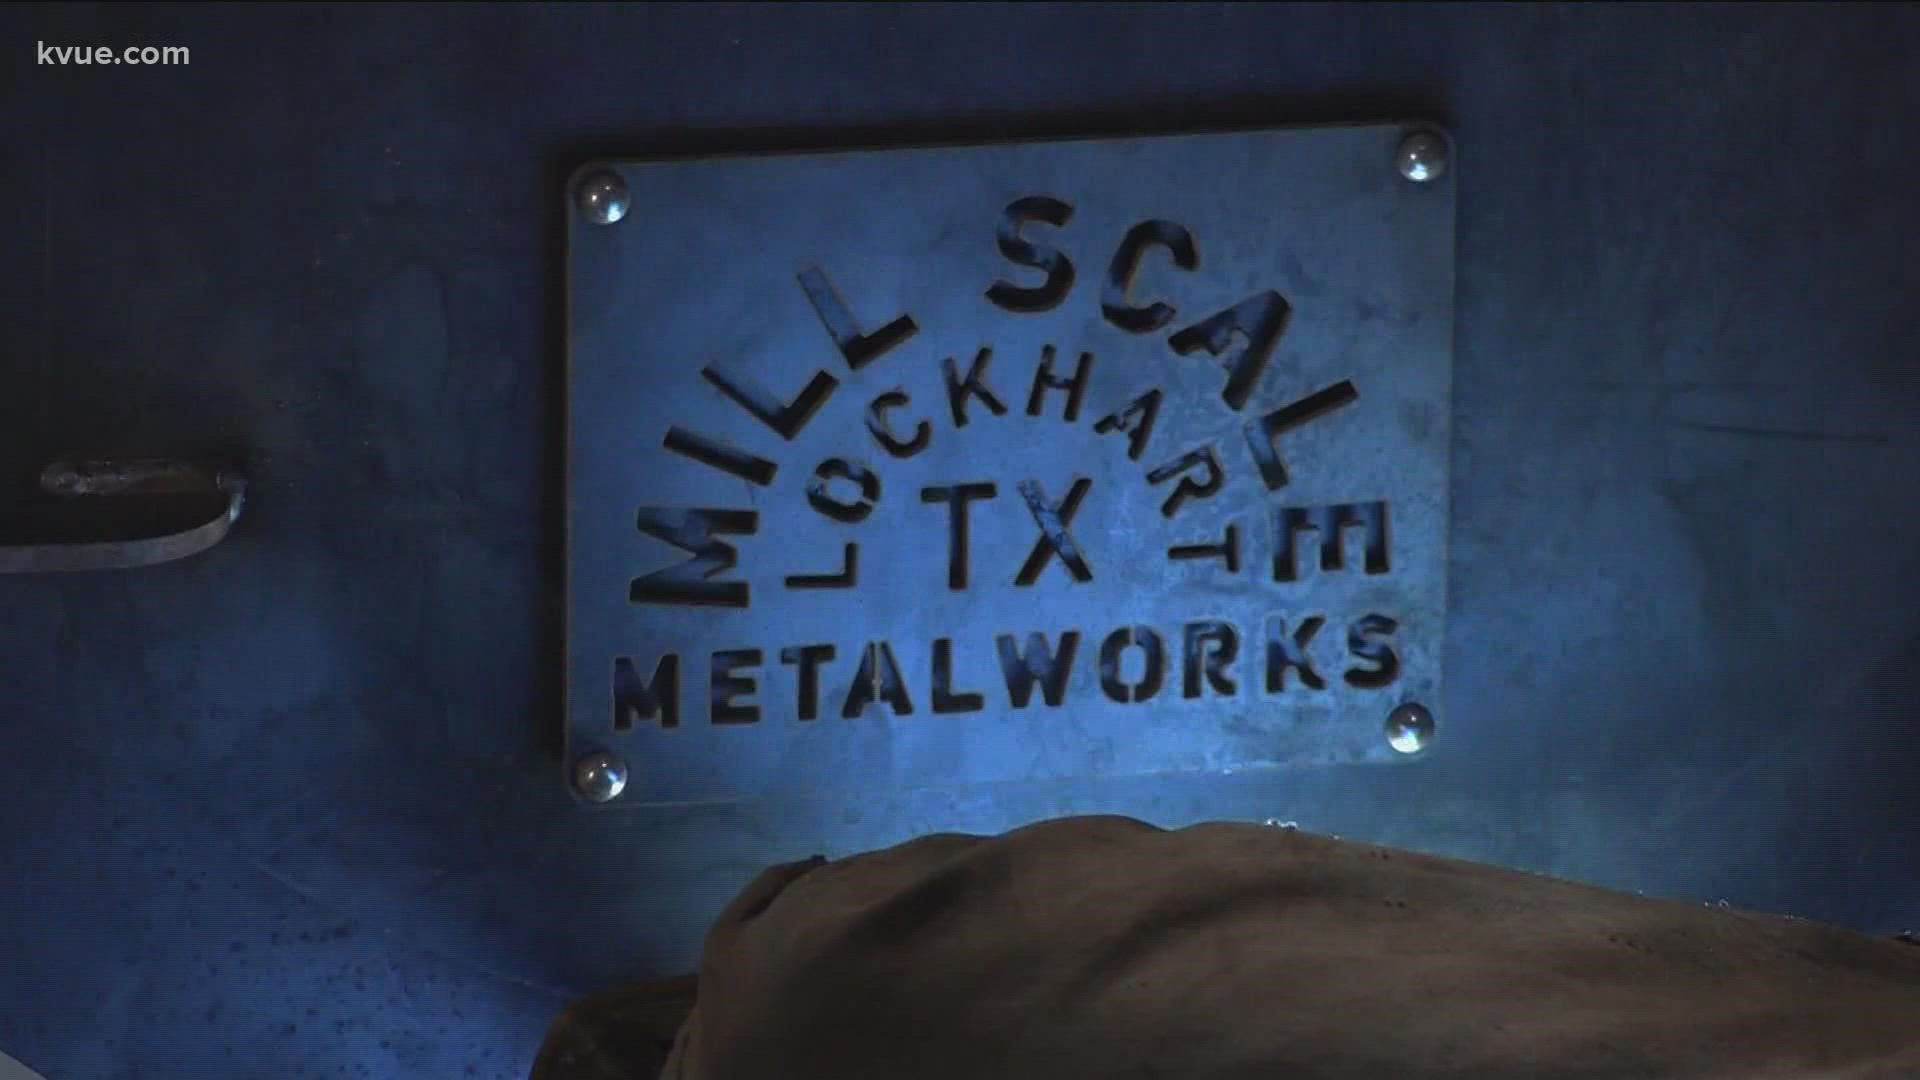 Mill Scale Metalworks, a company that builds custom barbecue pits and smokers, is growing its operation in Lockhart.